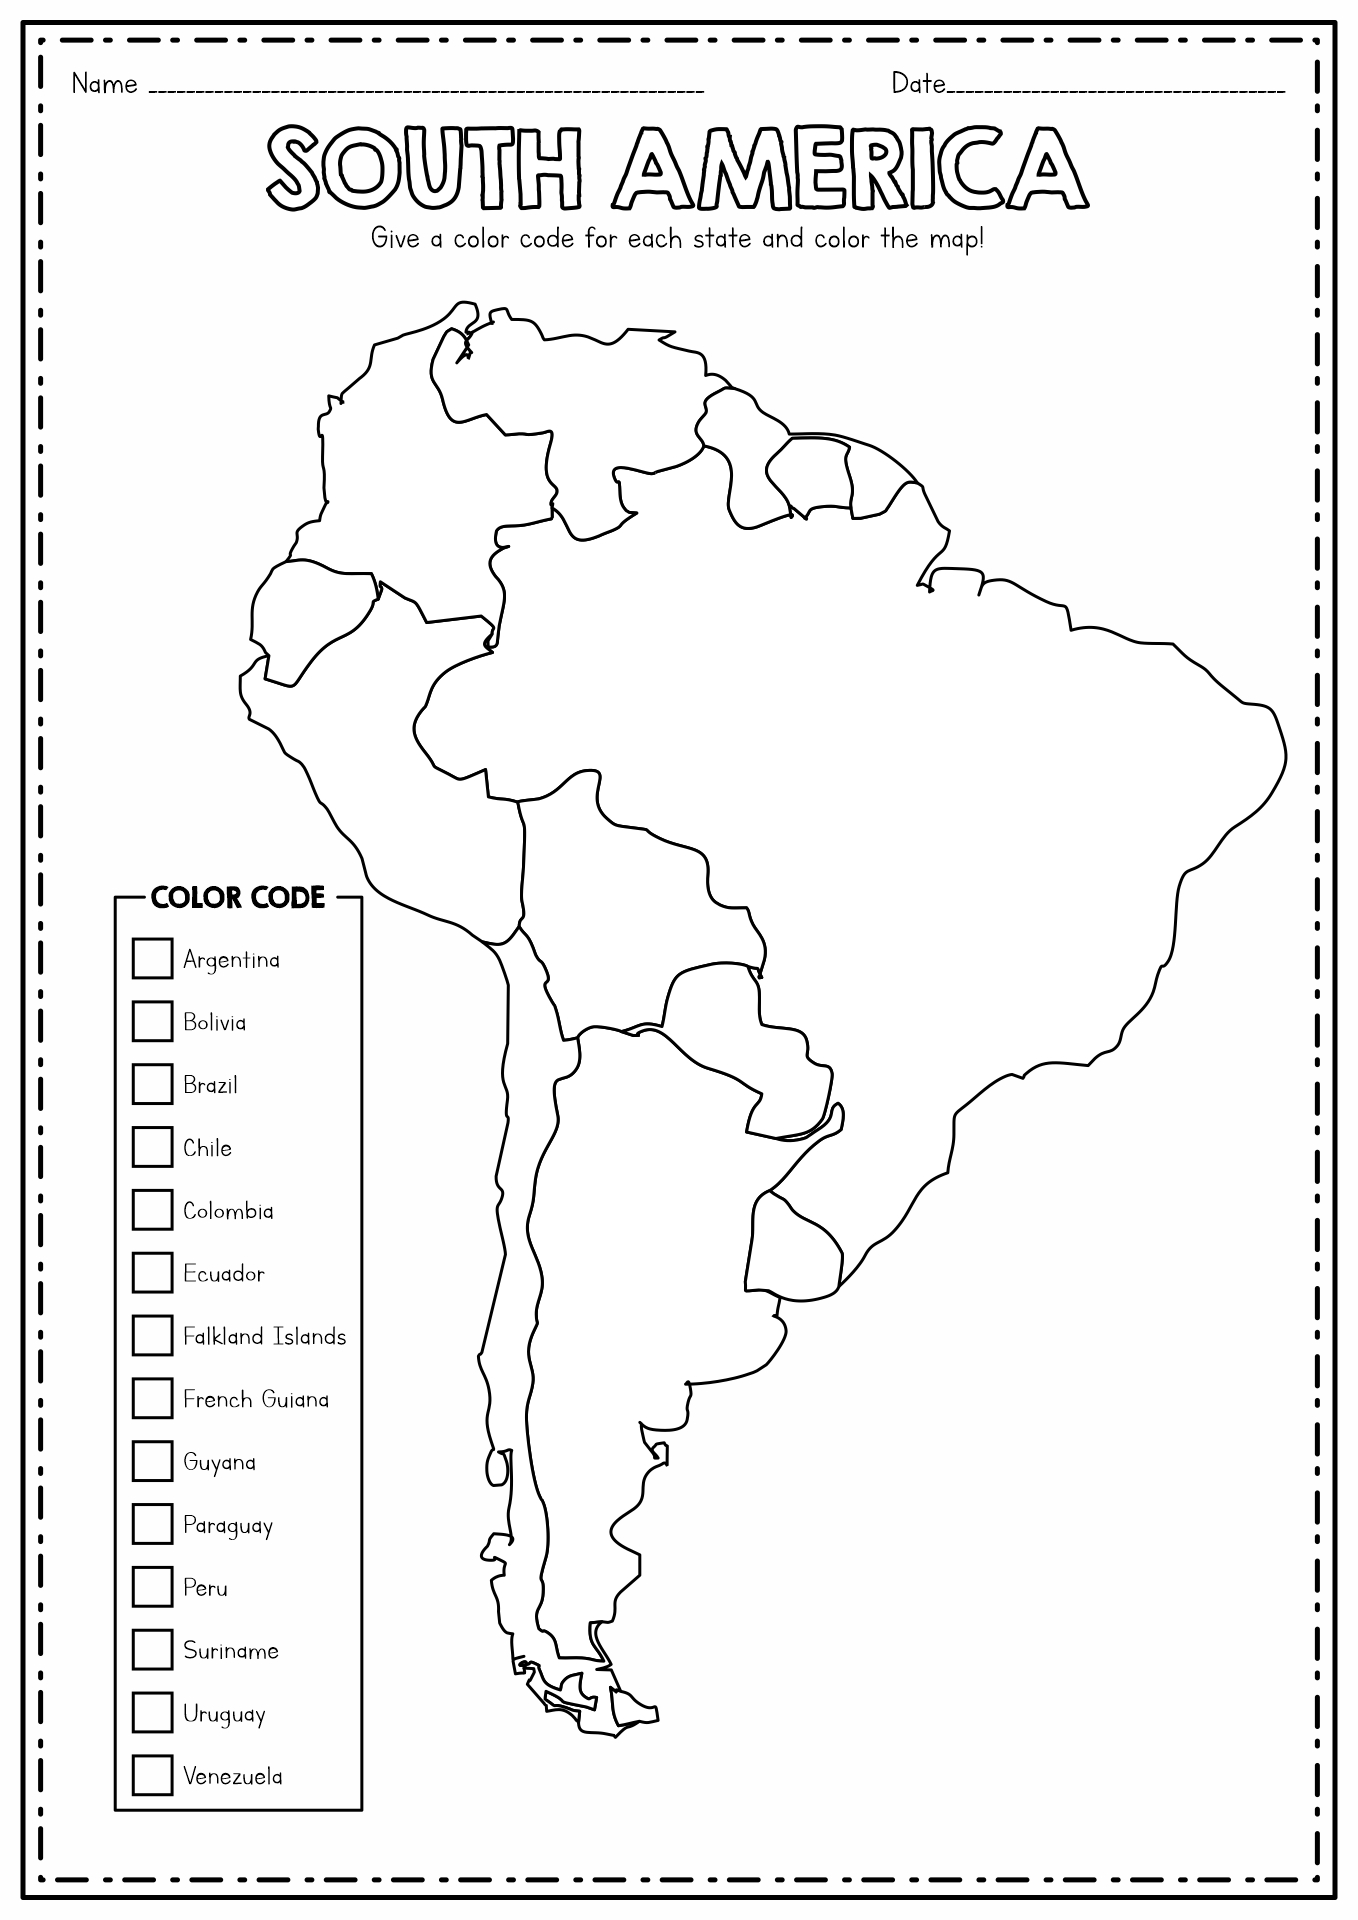 Coloring Map of South America Countries Image